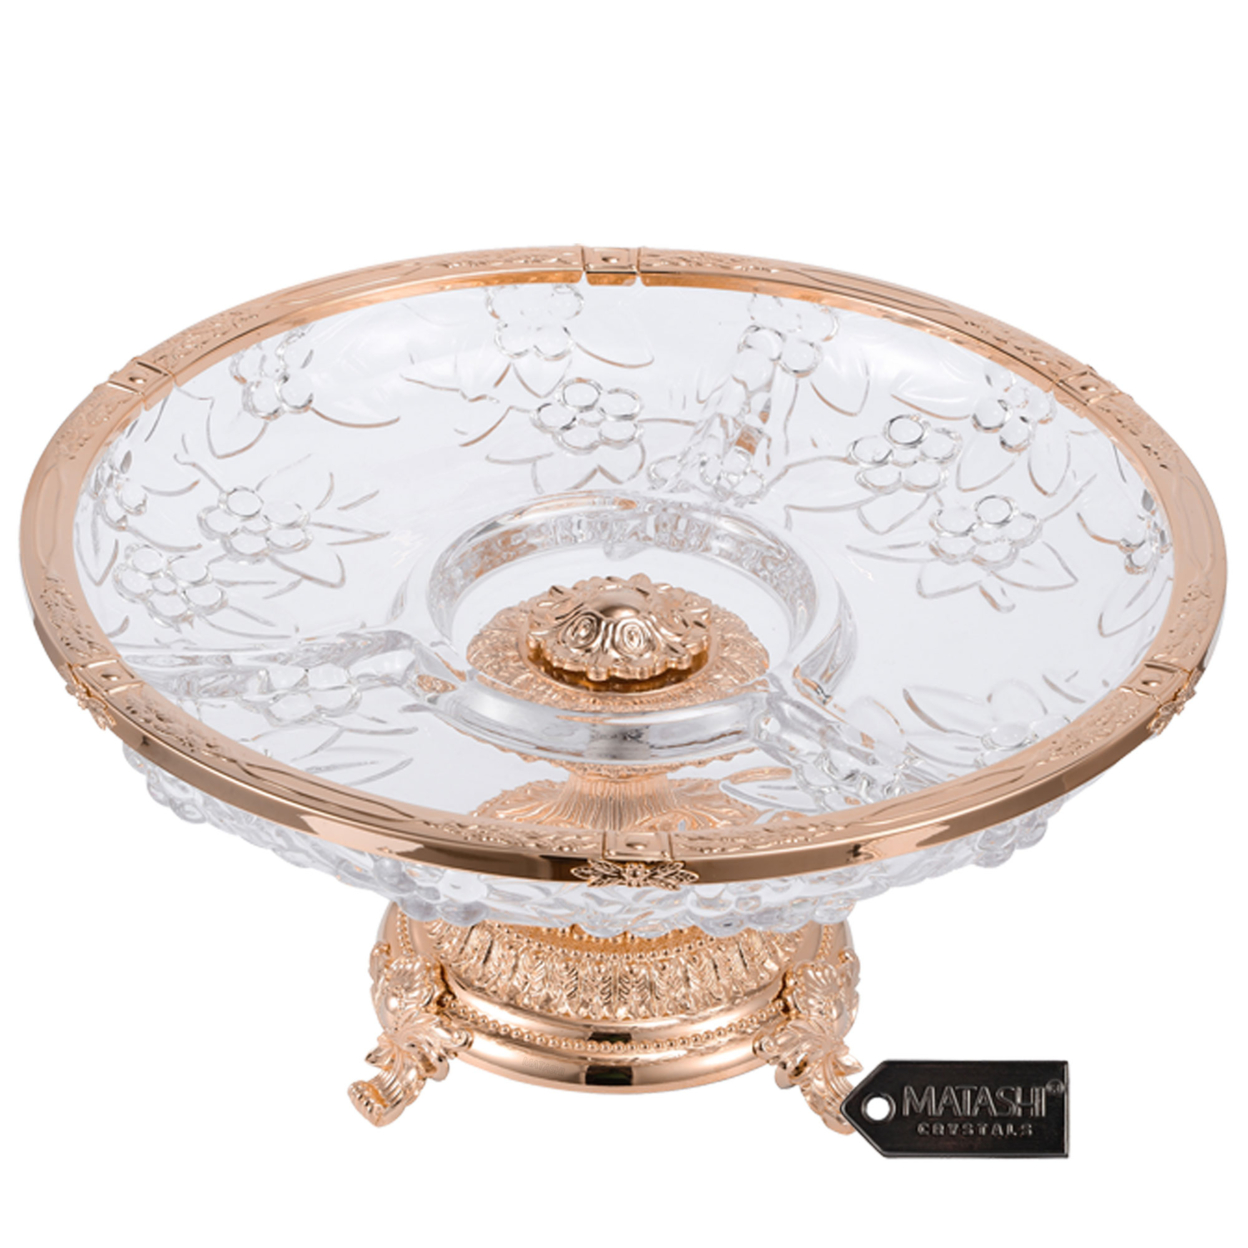 Matashi 3 Sectional Compote Centerpiece Decorative Bowl Round Serving Platter W Rose Gold Plated Pedestal Base For Weddings Parties Tabletop